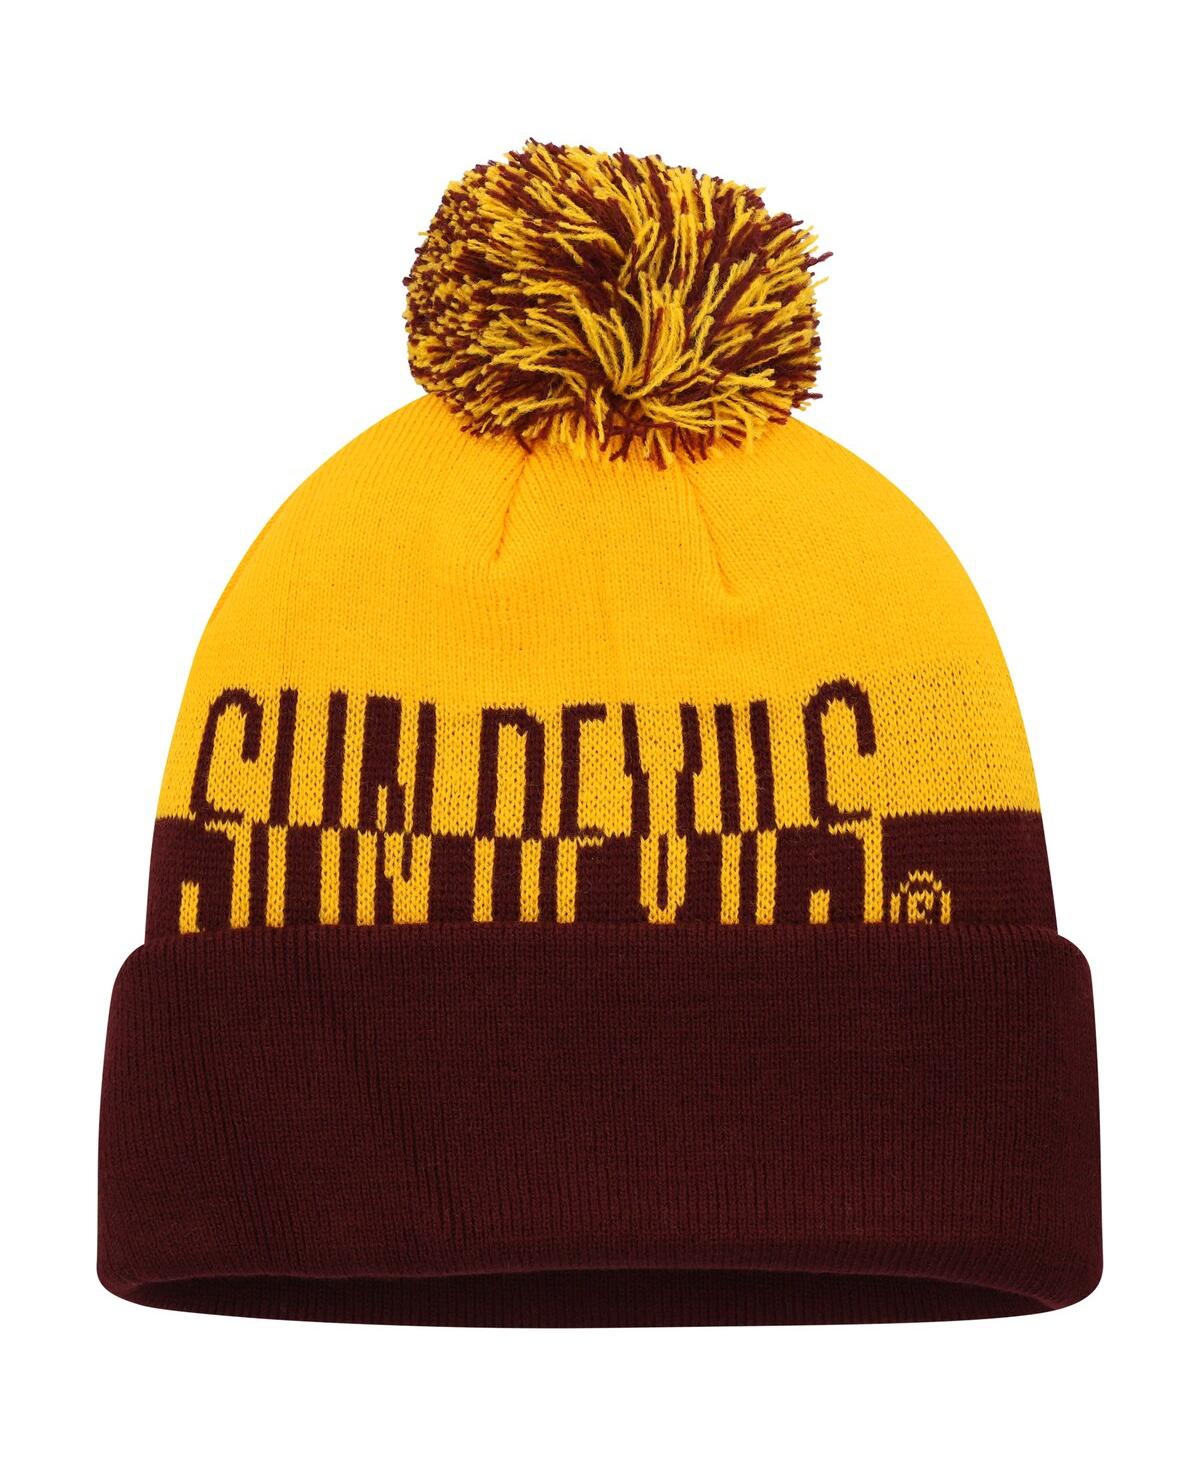 Shop Adidas Originals Men's Adidas Maroon And Gold Arizona State Sun Devils Colorblock Cuffed Knit Hat With Pom In Maroon,gold